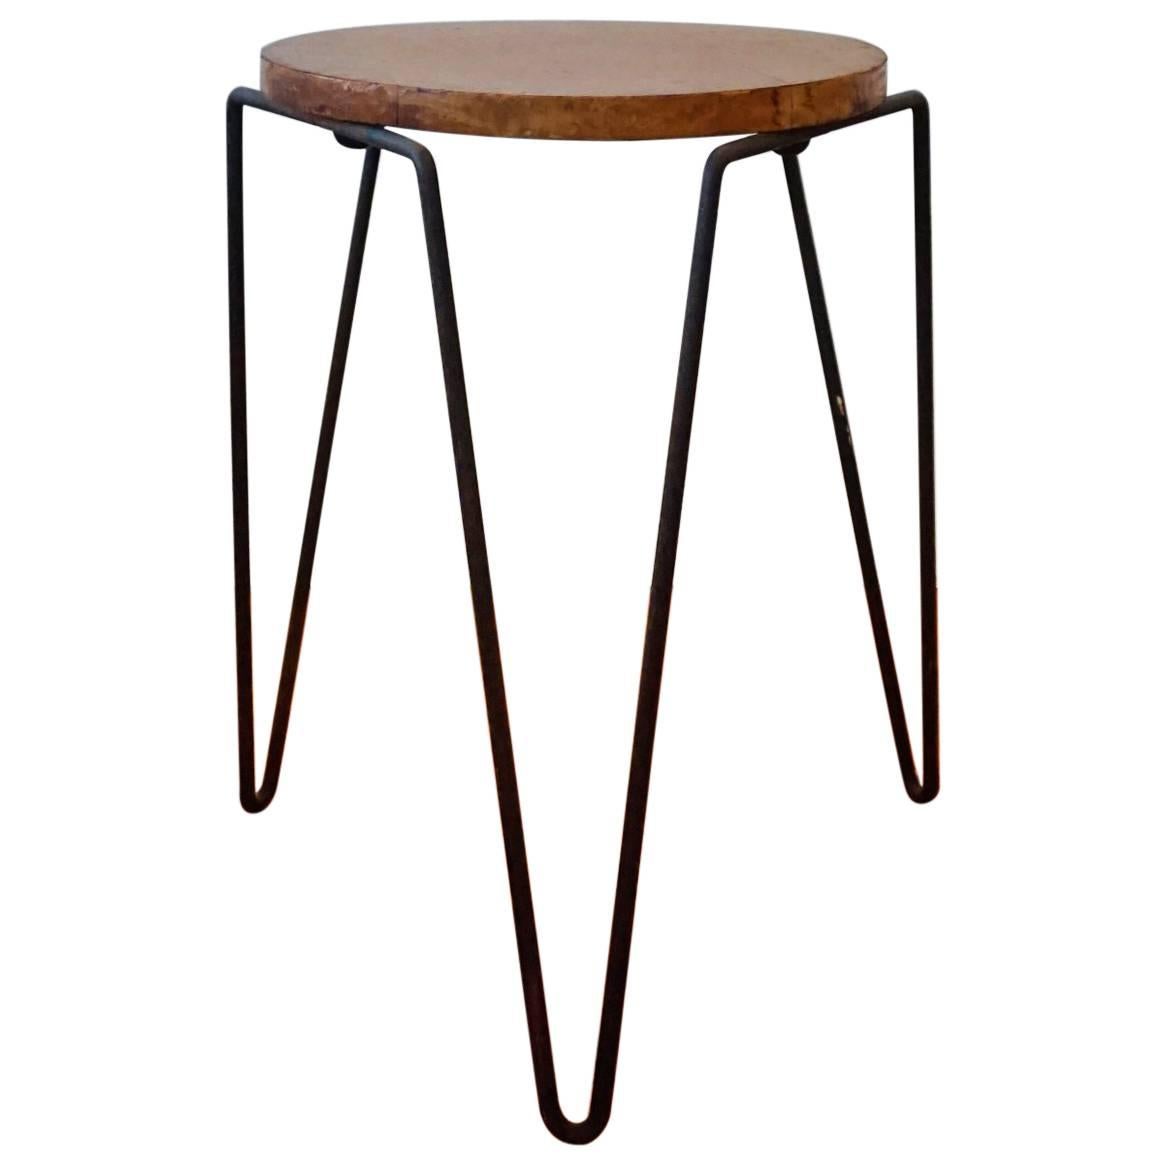 1950s Inco Iron and Wood Side Table or Stool